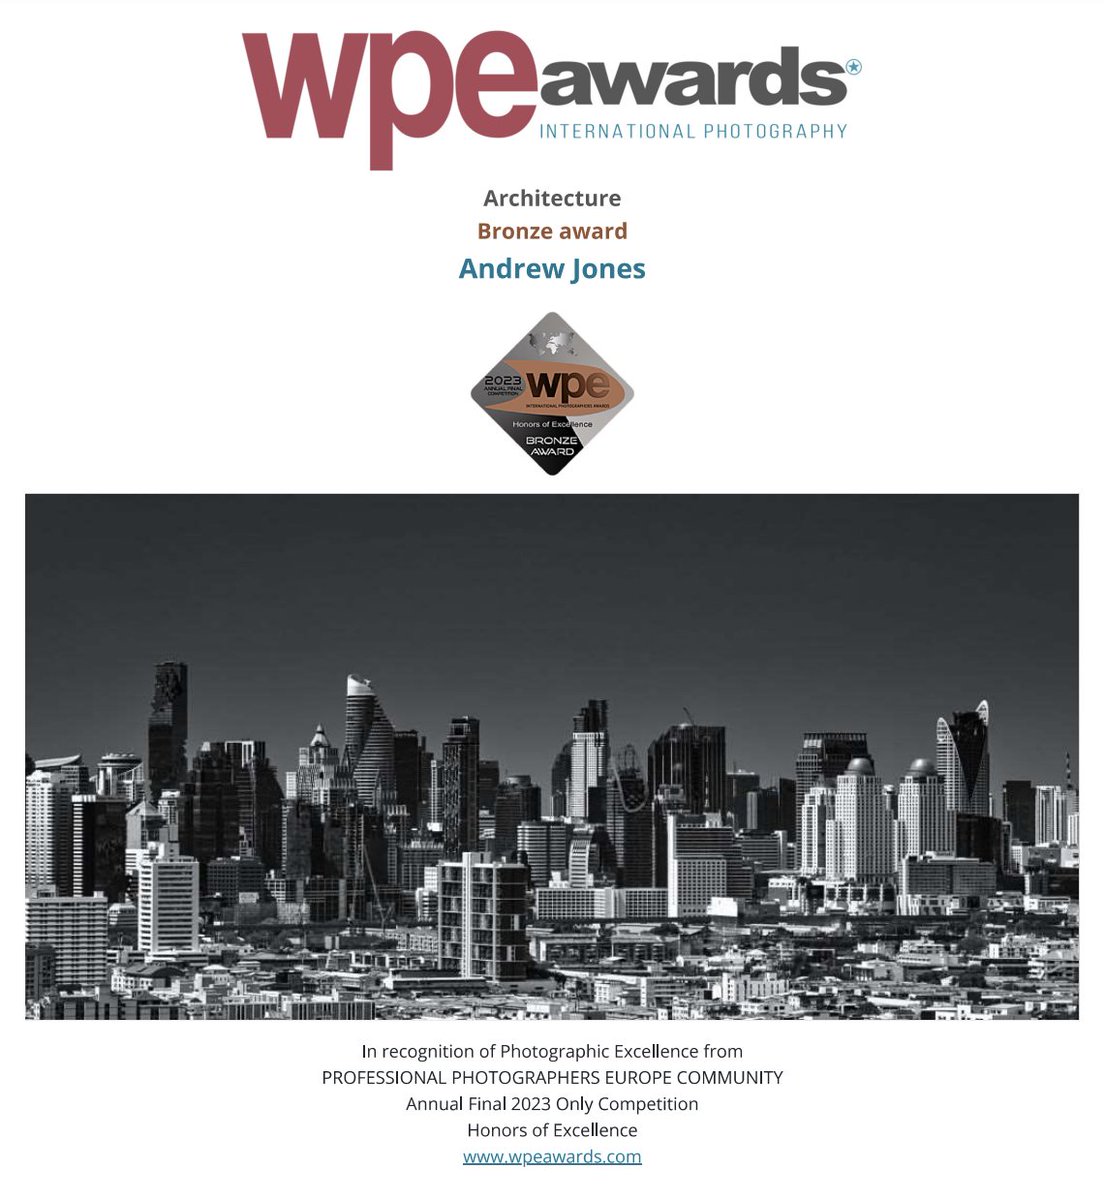 Just been awarded two certificates from WPE International Photography. Happy Days! 😍📷

#WPEInternationalPhotography #WPEAwards #photographyaward #photographycertificate #photography #awards #certificate #Saltash #Bangkok #architecture #royalalbert #geese #blackandwhite